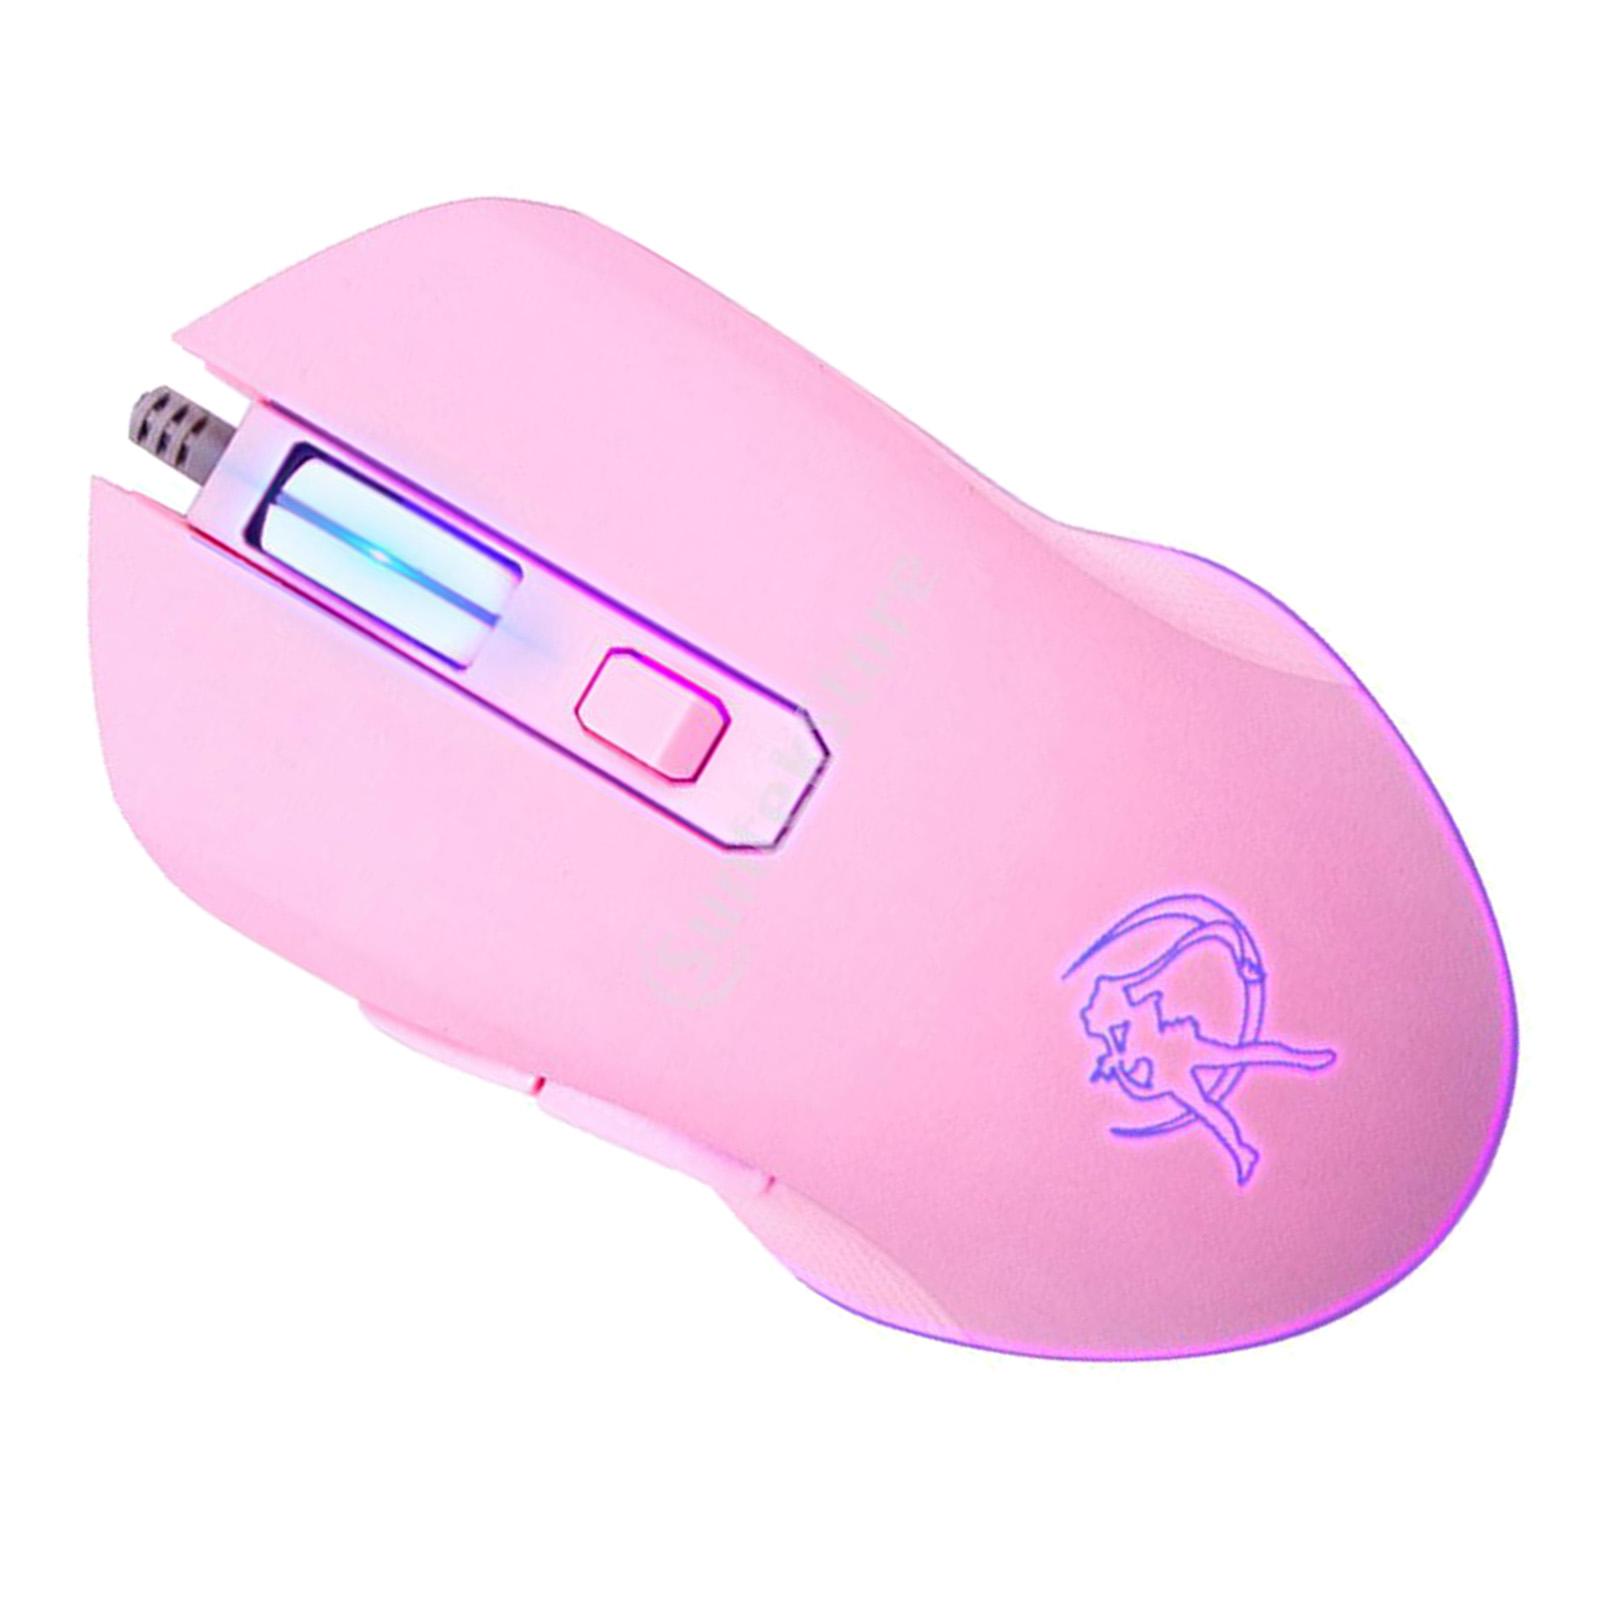 Ergonomic USB Wired Gaming Mouse 6 Button Silent  Led Backlit for PC